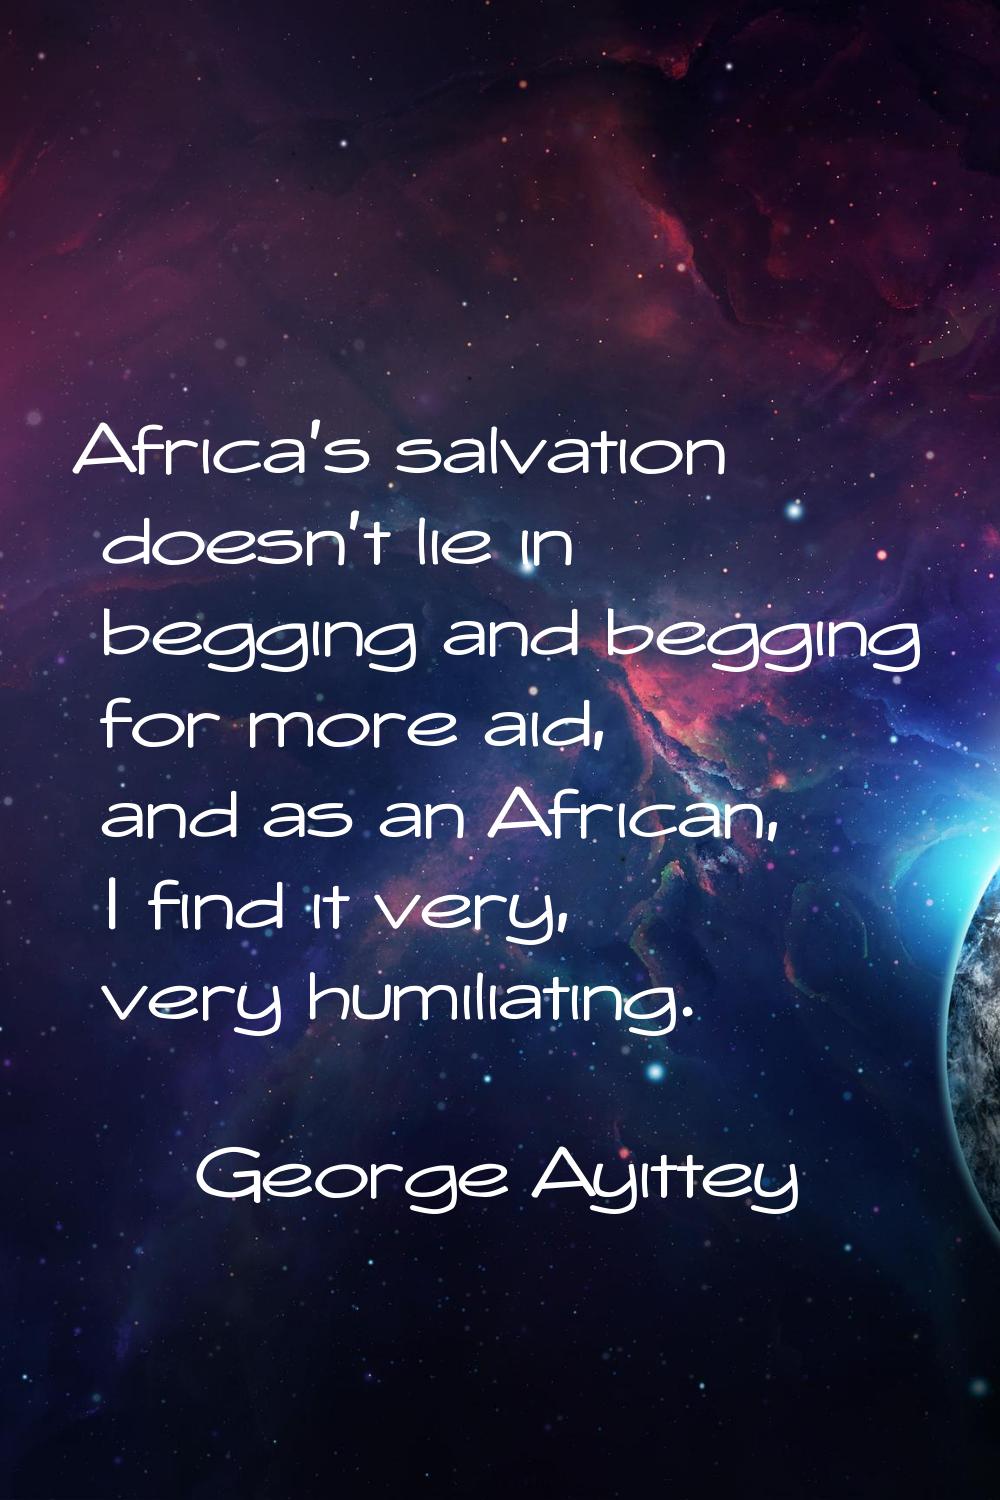 Africa's salvation doesn't lie in begging and begging for more aid, and as an African, I find it ve